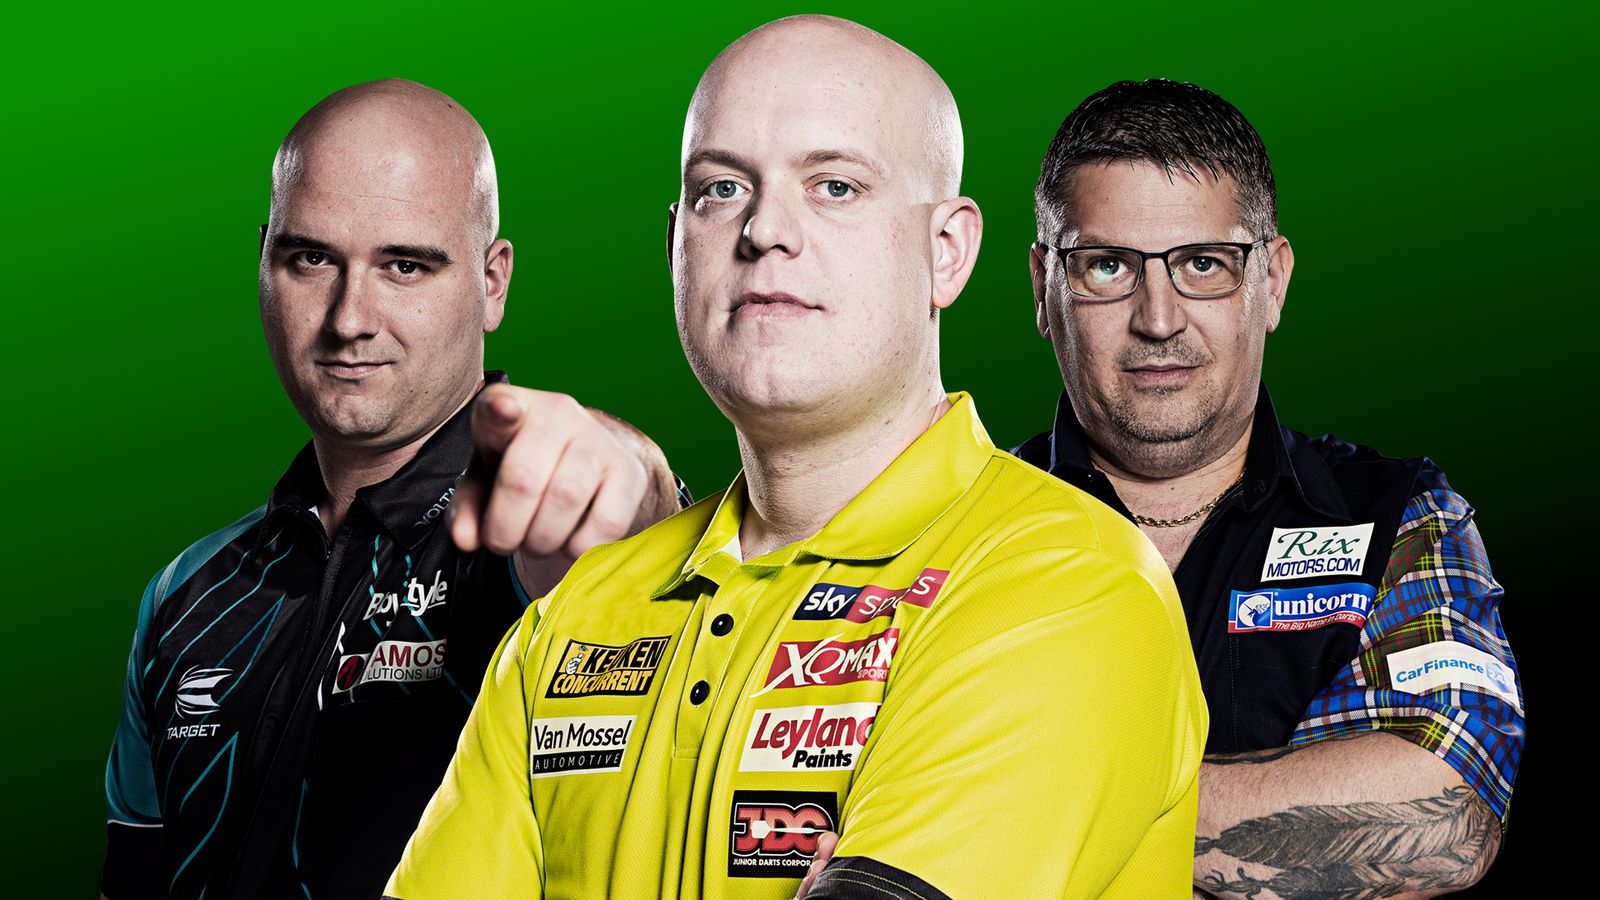 Premier League Darts In Manchester Live On Sky Sports Darts News Sky Sports 